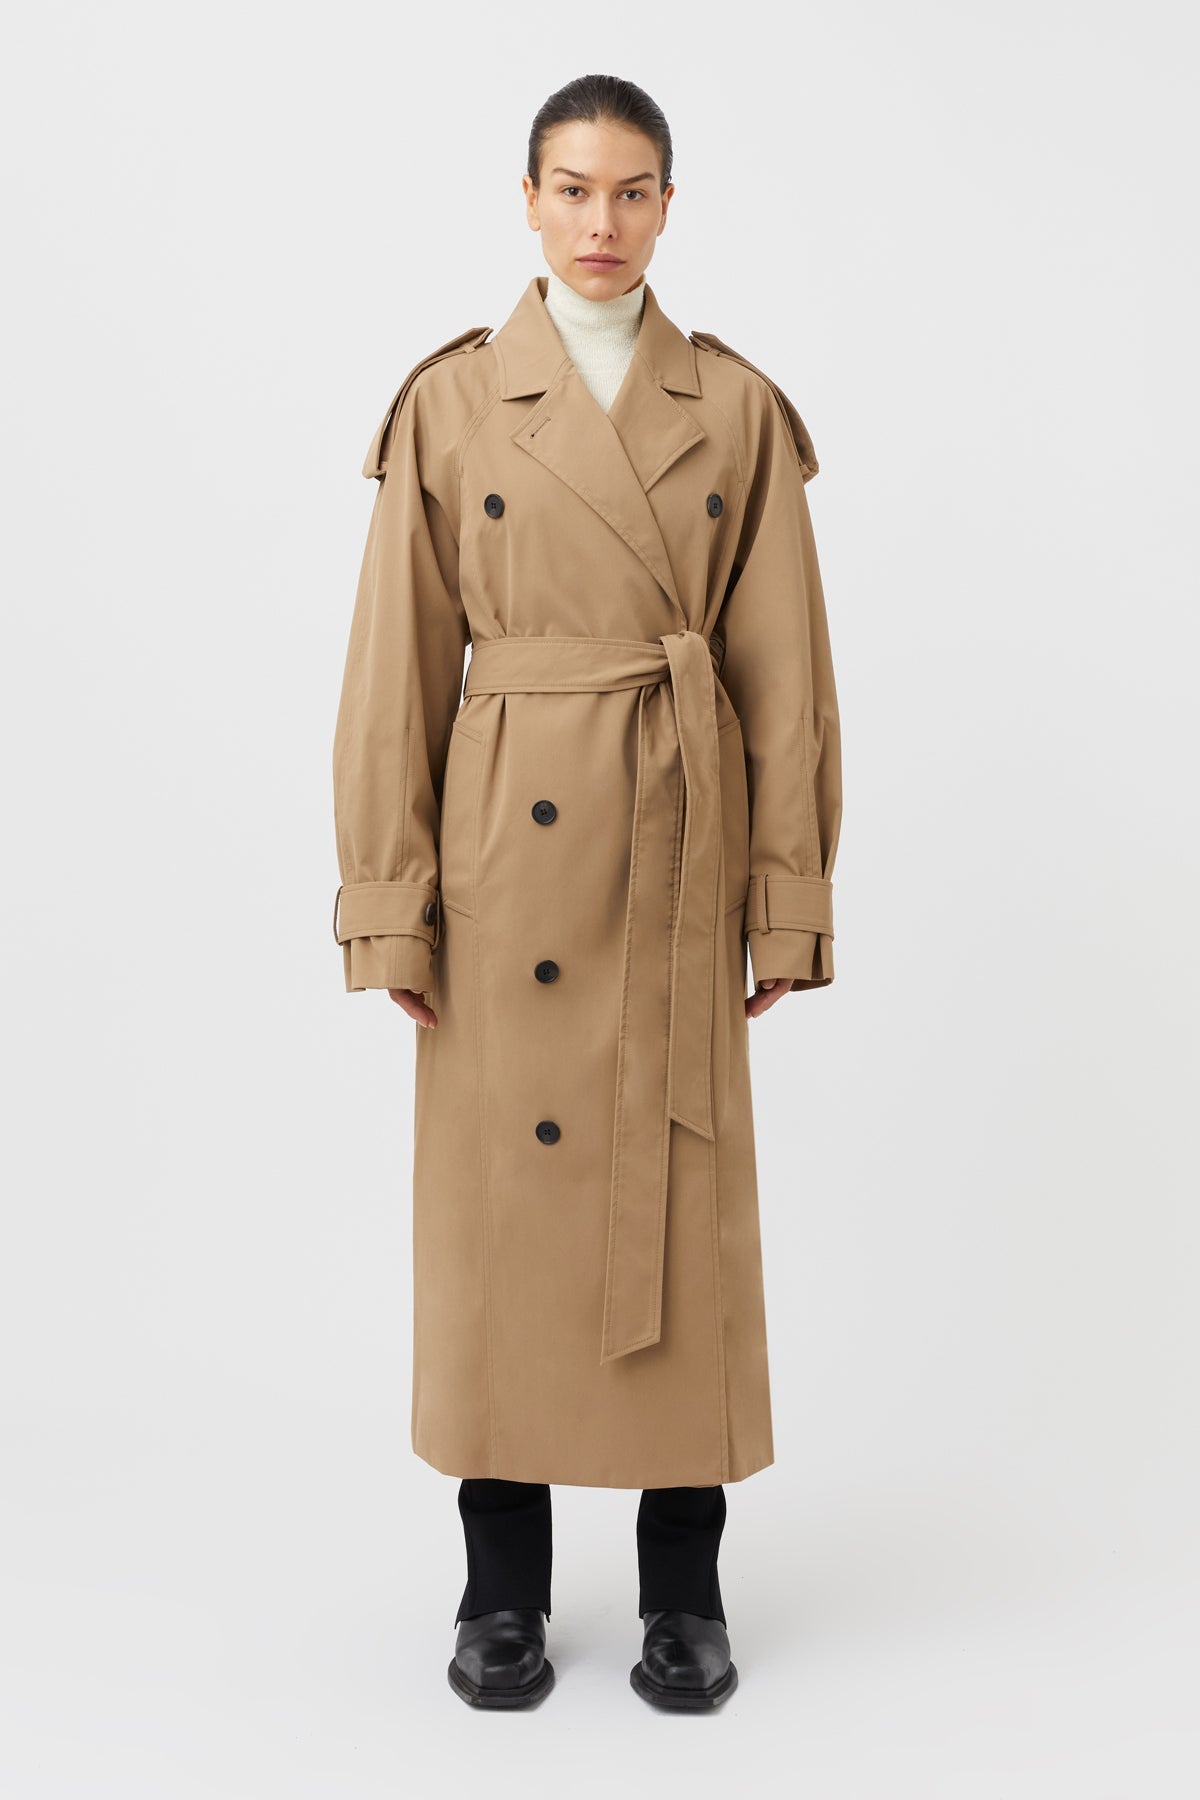 Camilla & Marc | Collins Tailored Trench Coat - Camel